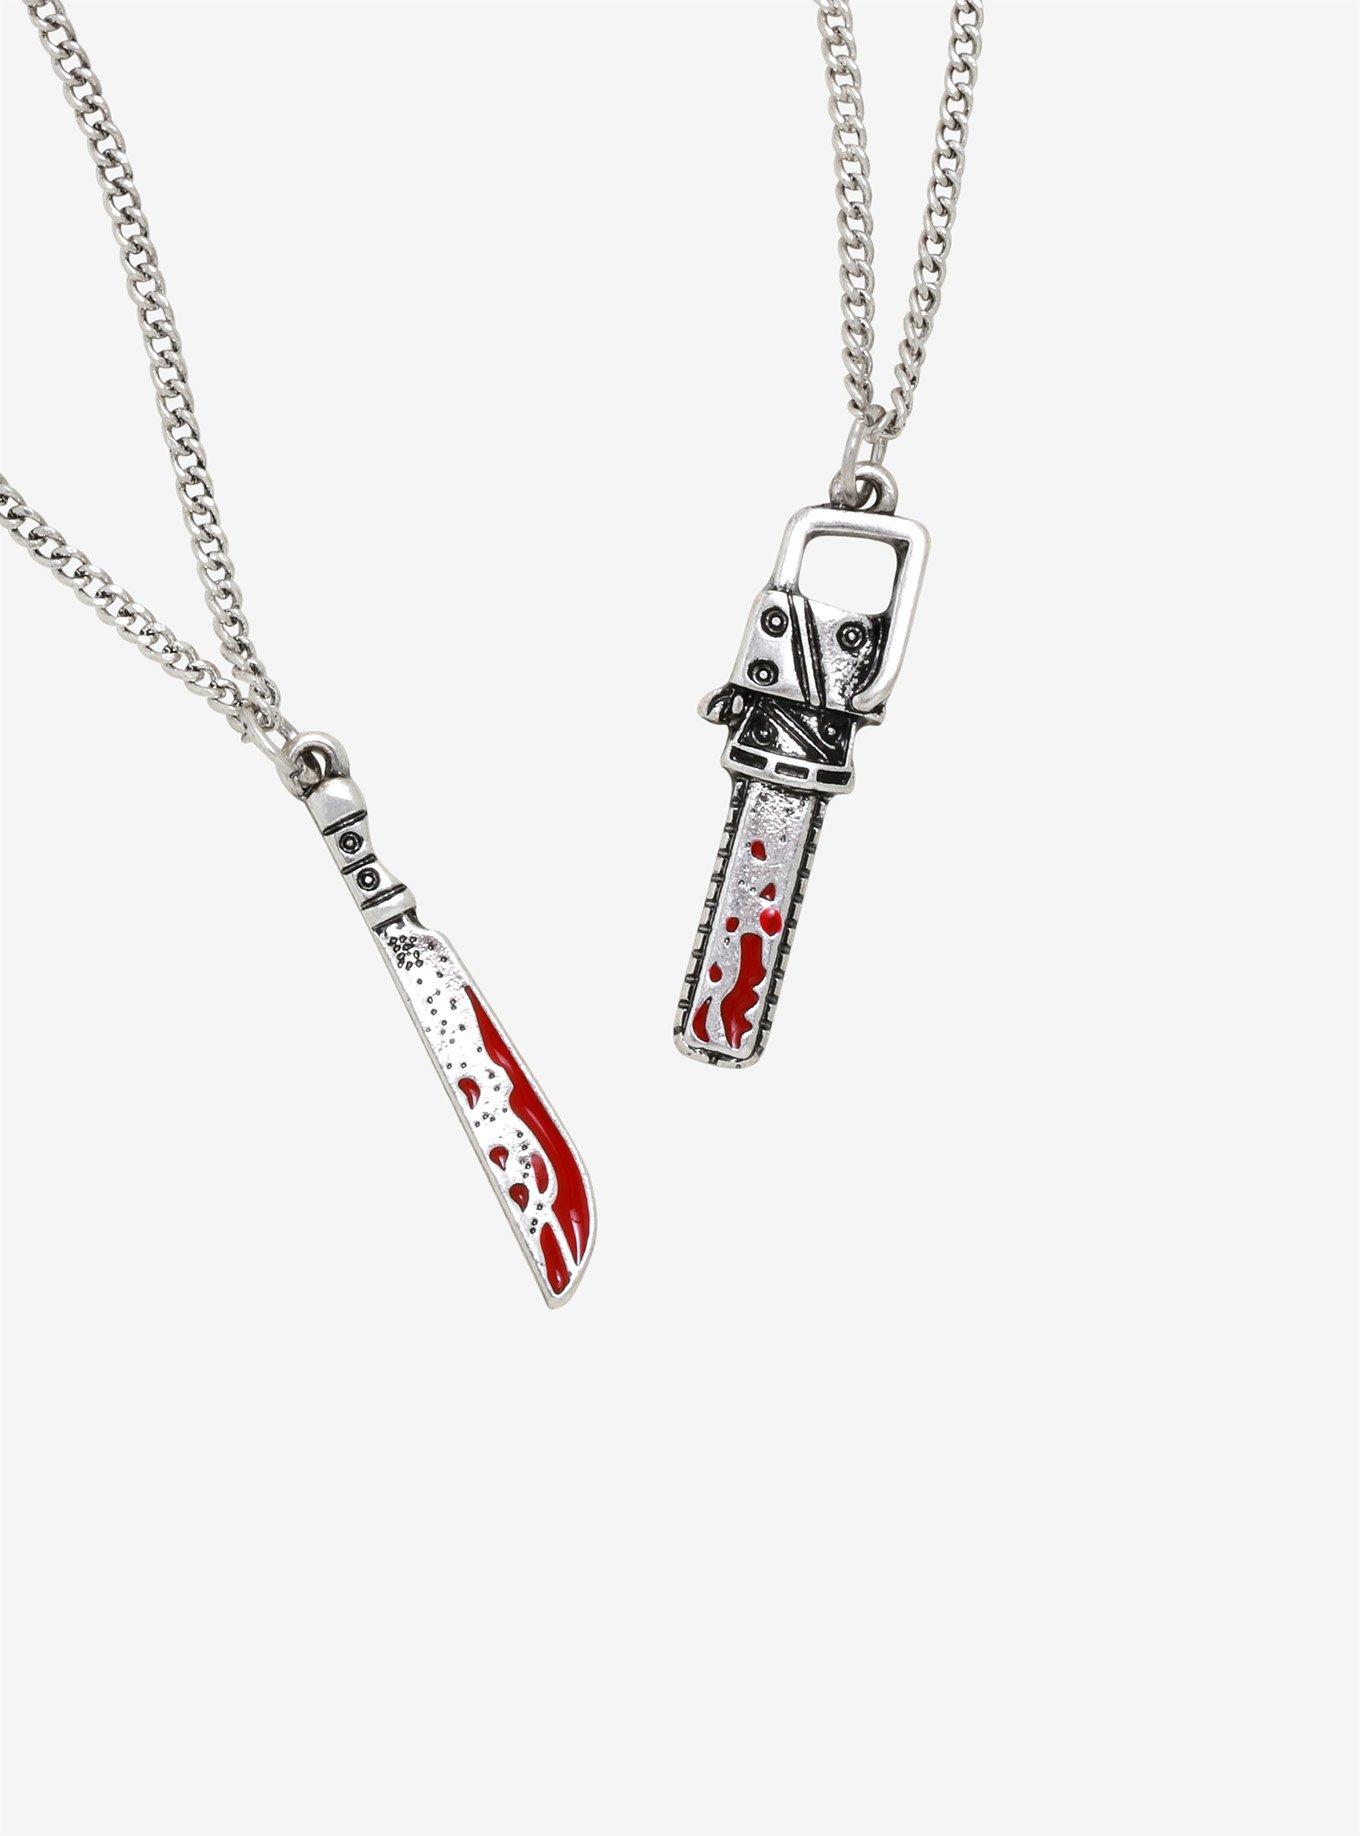 Deadly Weapons Necklace Set